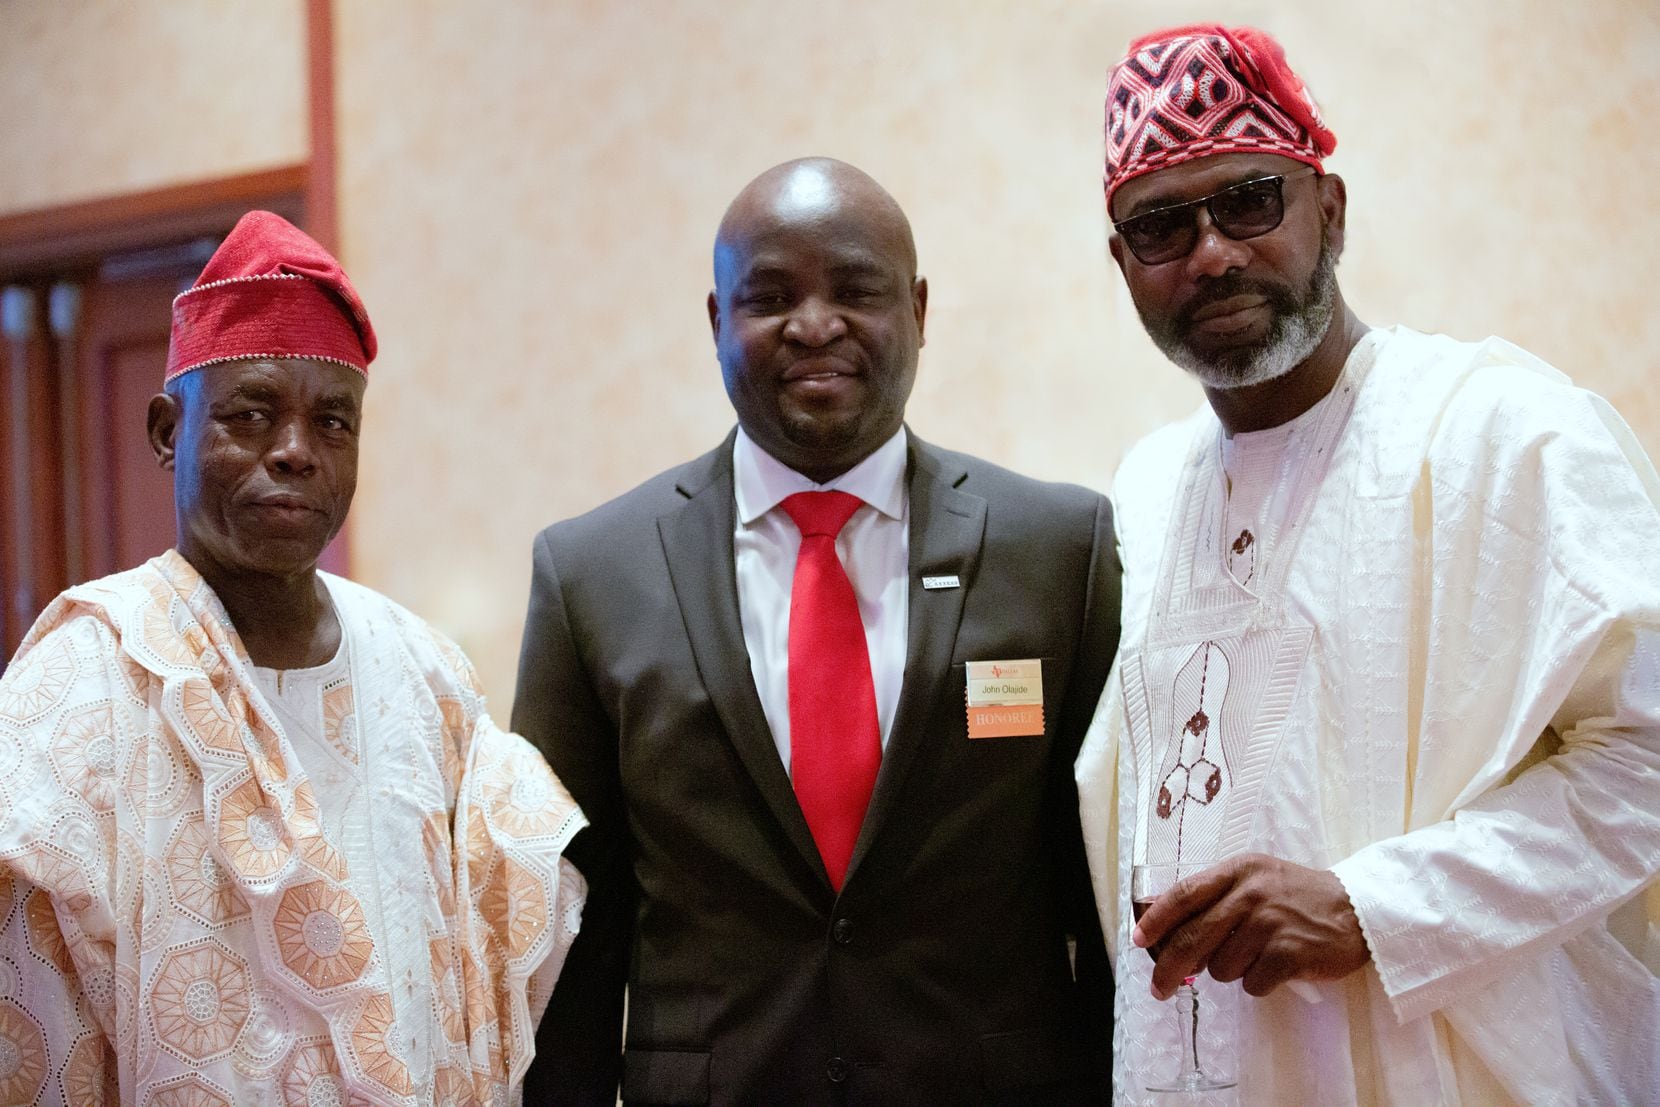 John Olajide, center, stands with his father, Daniel Olajide, right, and his uncle, Kunle Shonaike, at the Distinguished Alumnus reception at the University of Texas at Dallas in 2016.